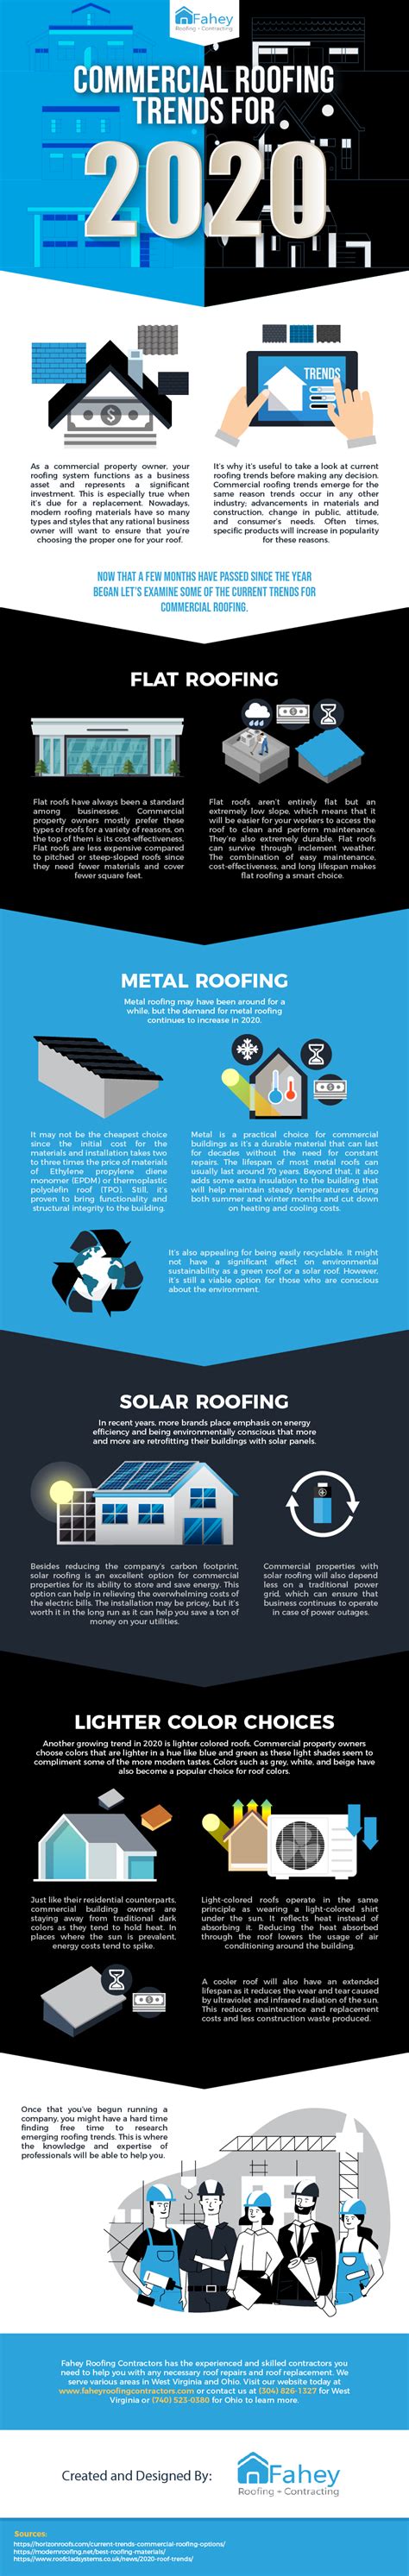 Commercial Roofing Trends For 2020 Infographic Fahey Roofing